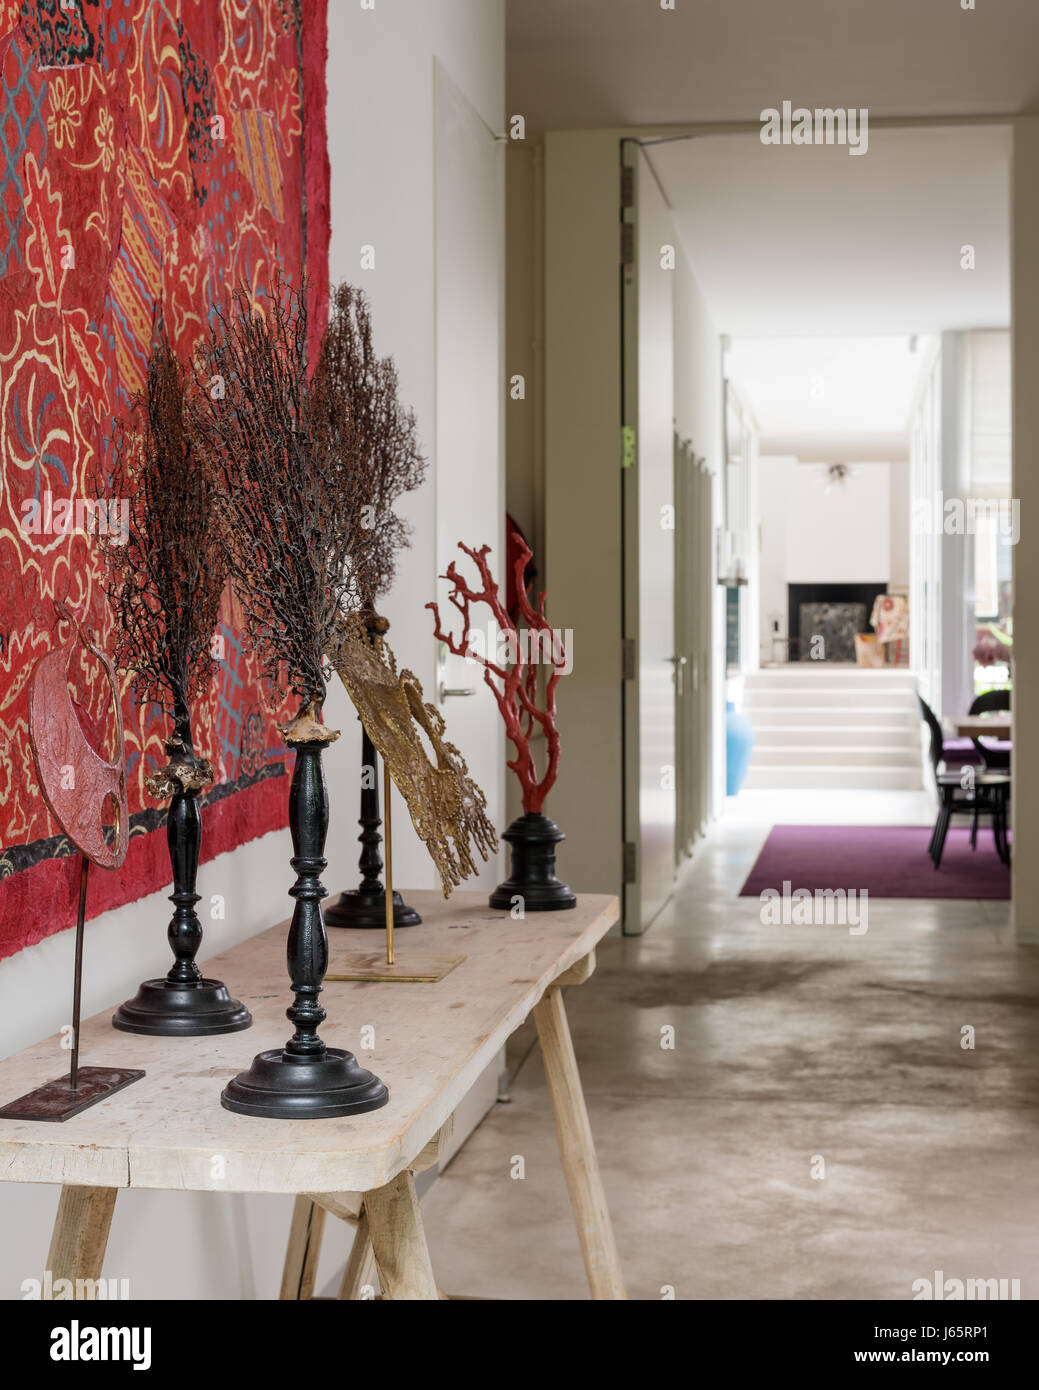 Artwork displayed with red wall covering in atelier hallway, Brussels Stock Photo